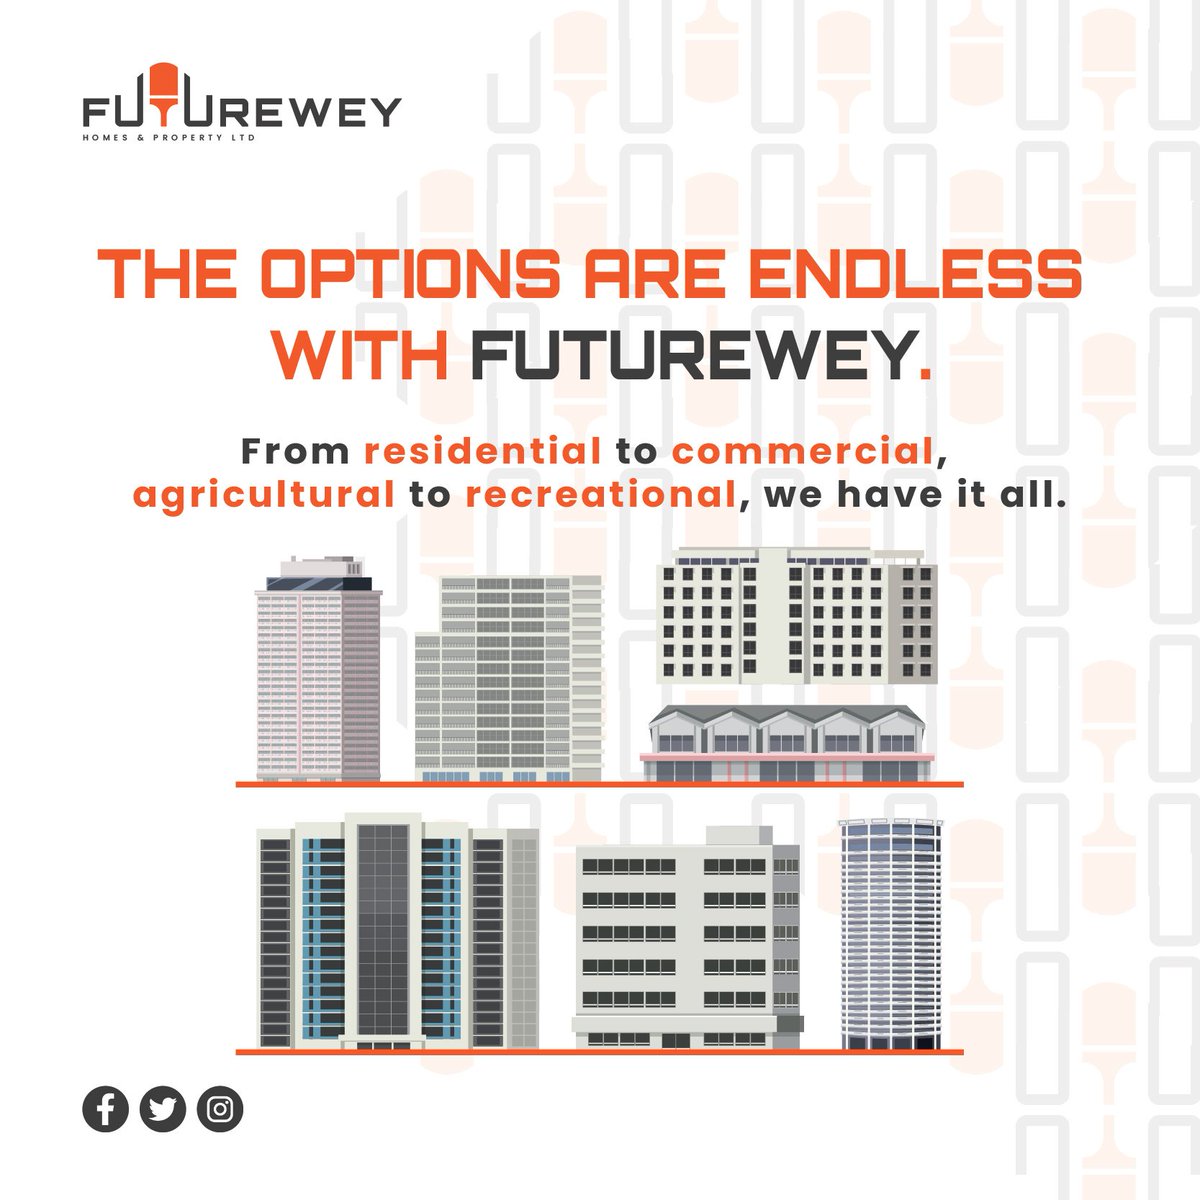 The options are endless when it comes to landed property at Futurewey.
 

No matter what you're looking for, we're confident that we have something that will suit your needs. 

#Futurewey #LandProperties #realestatemarket